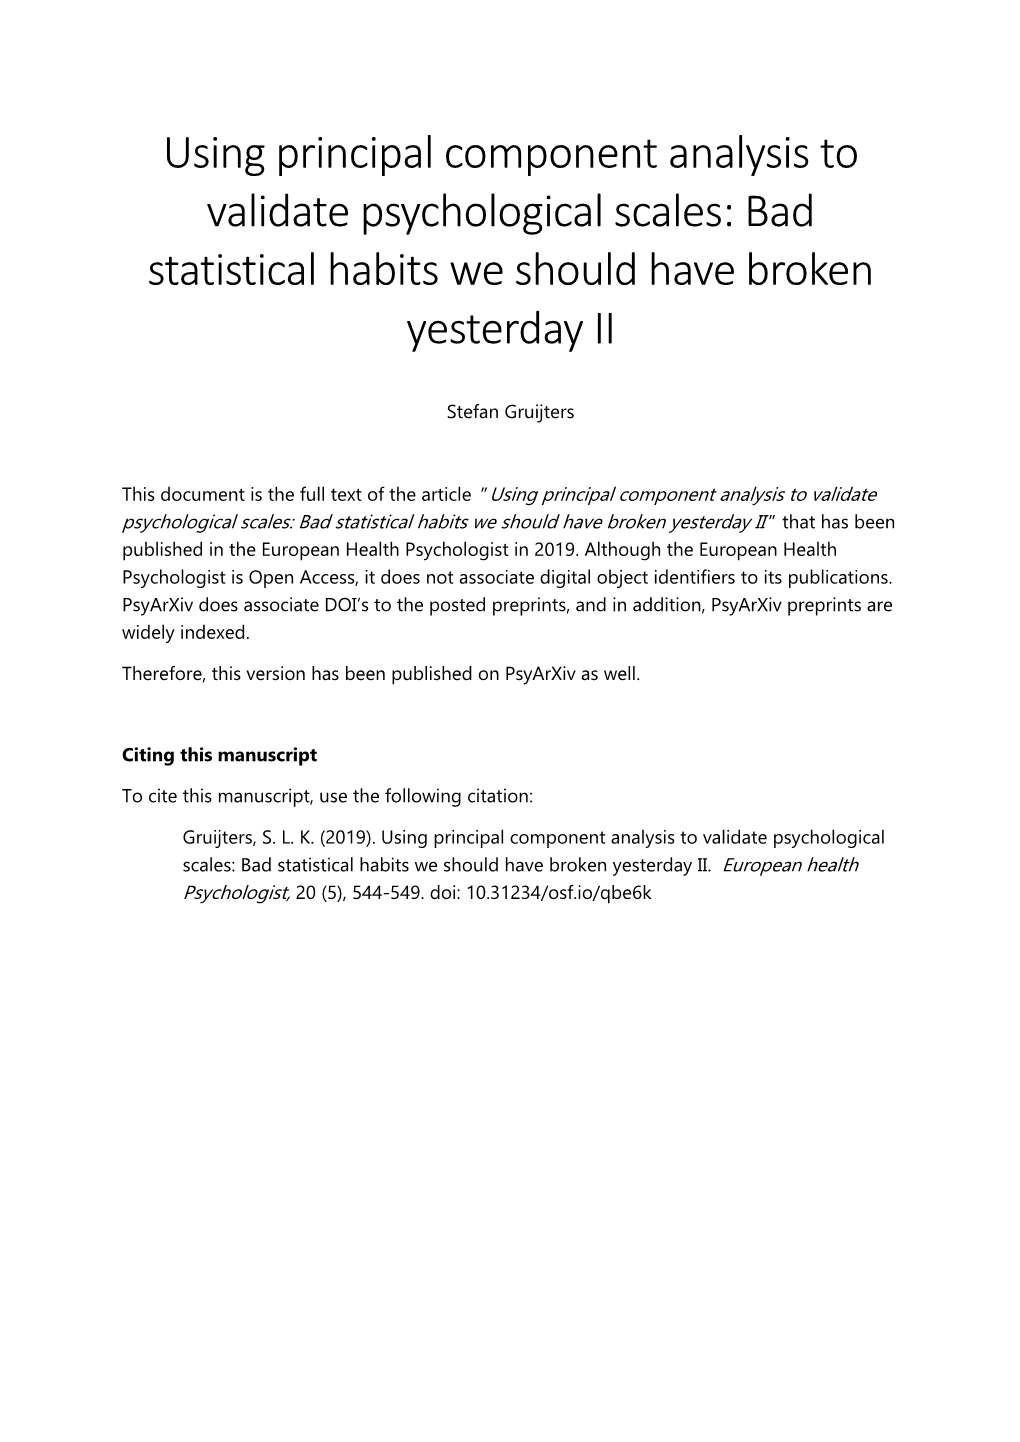 Using Principal Component Analysis to Validate Psychological Scales: Bad Statistical Habits We Should Have Broken Yesterday II